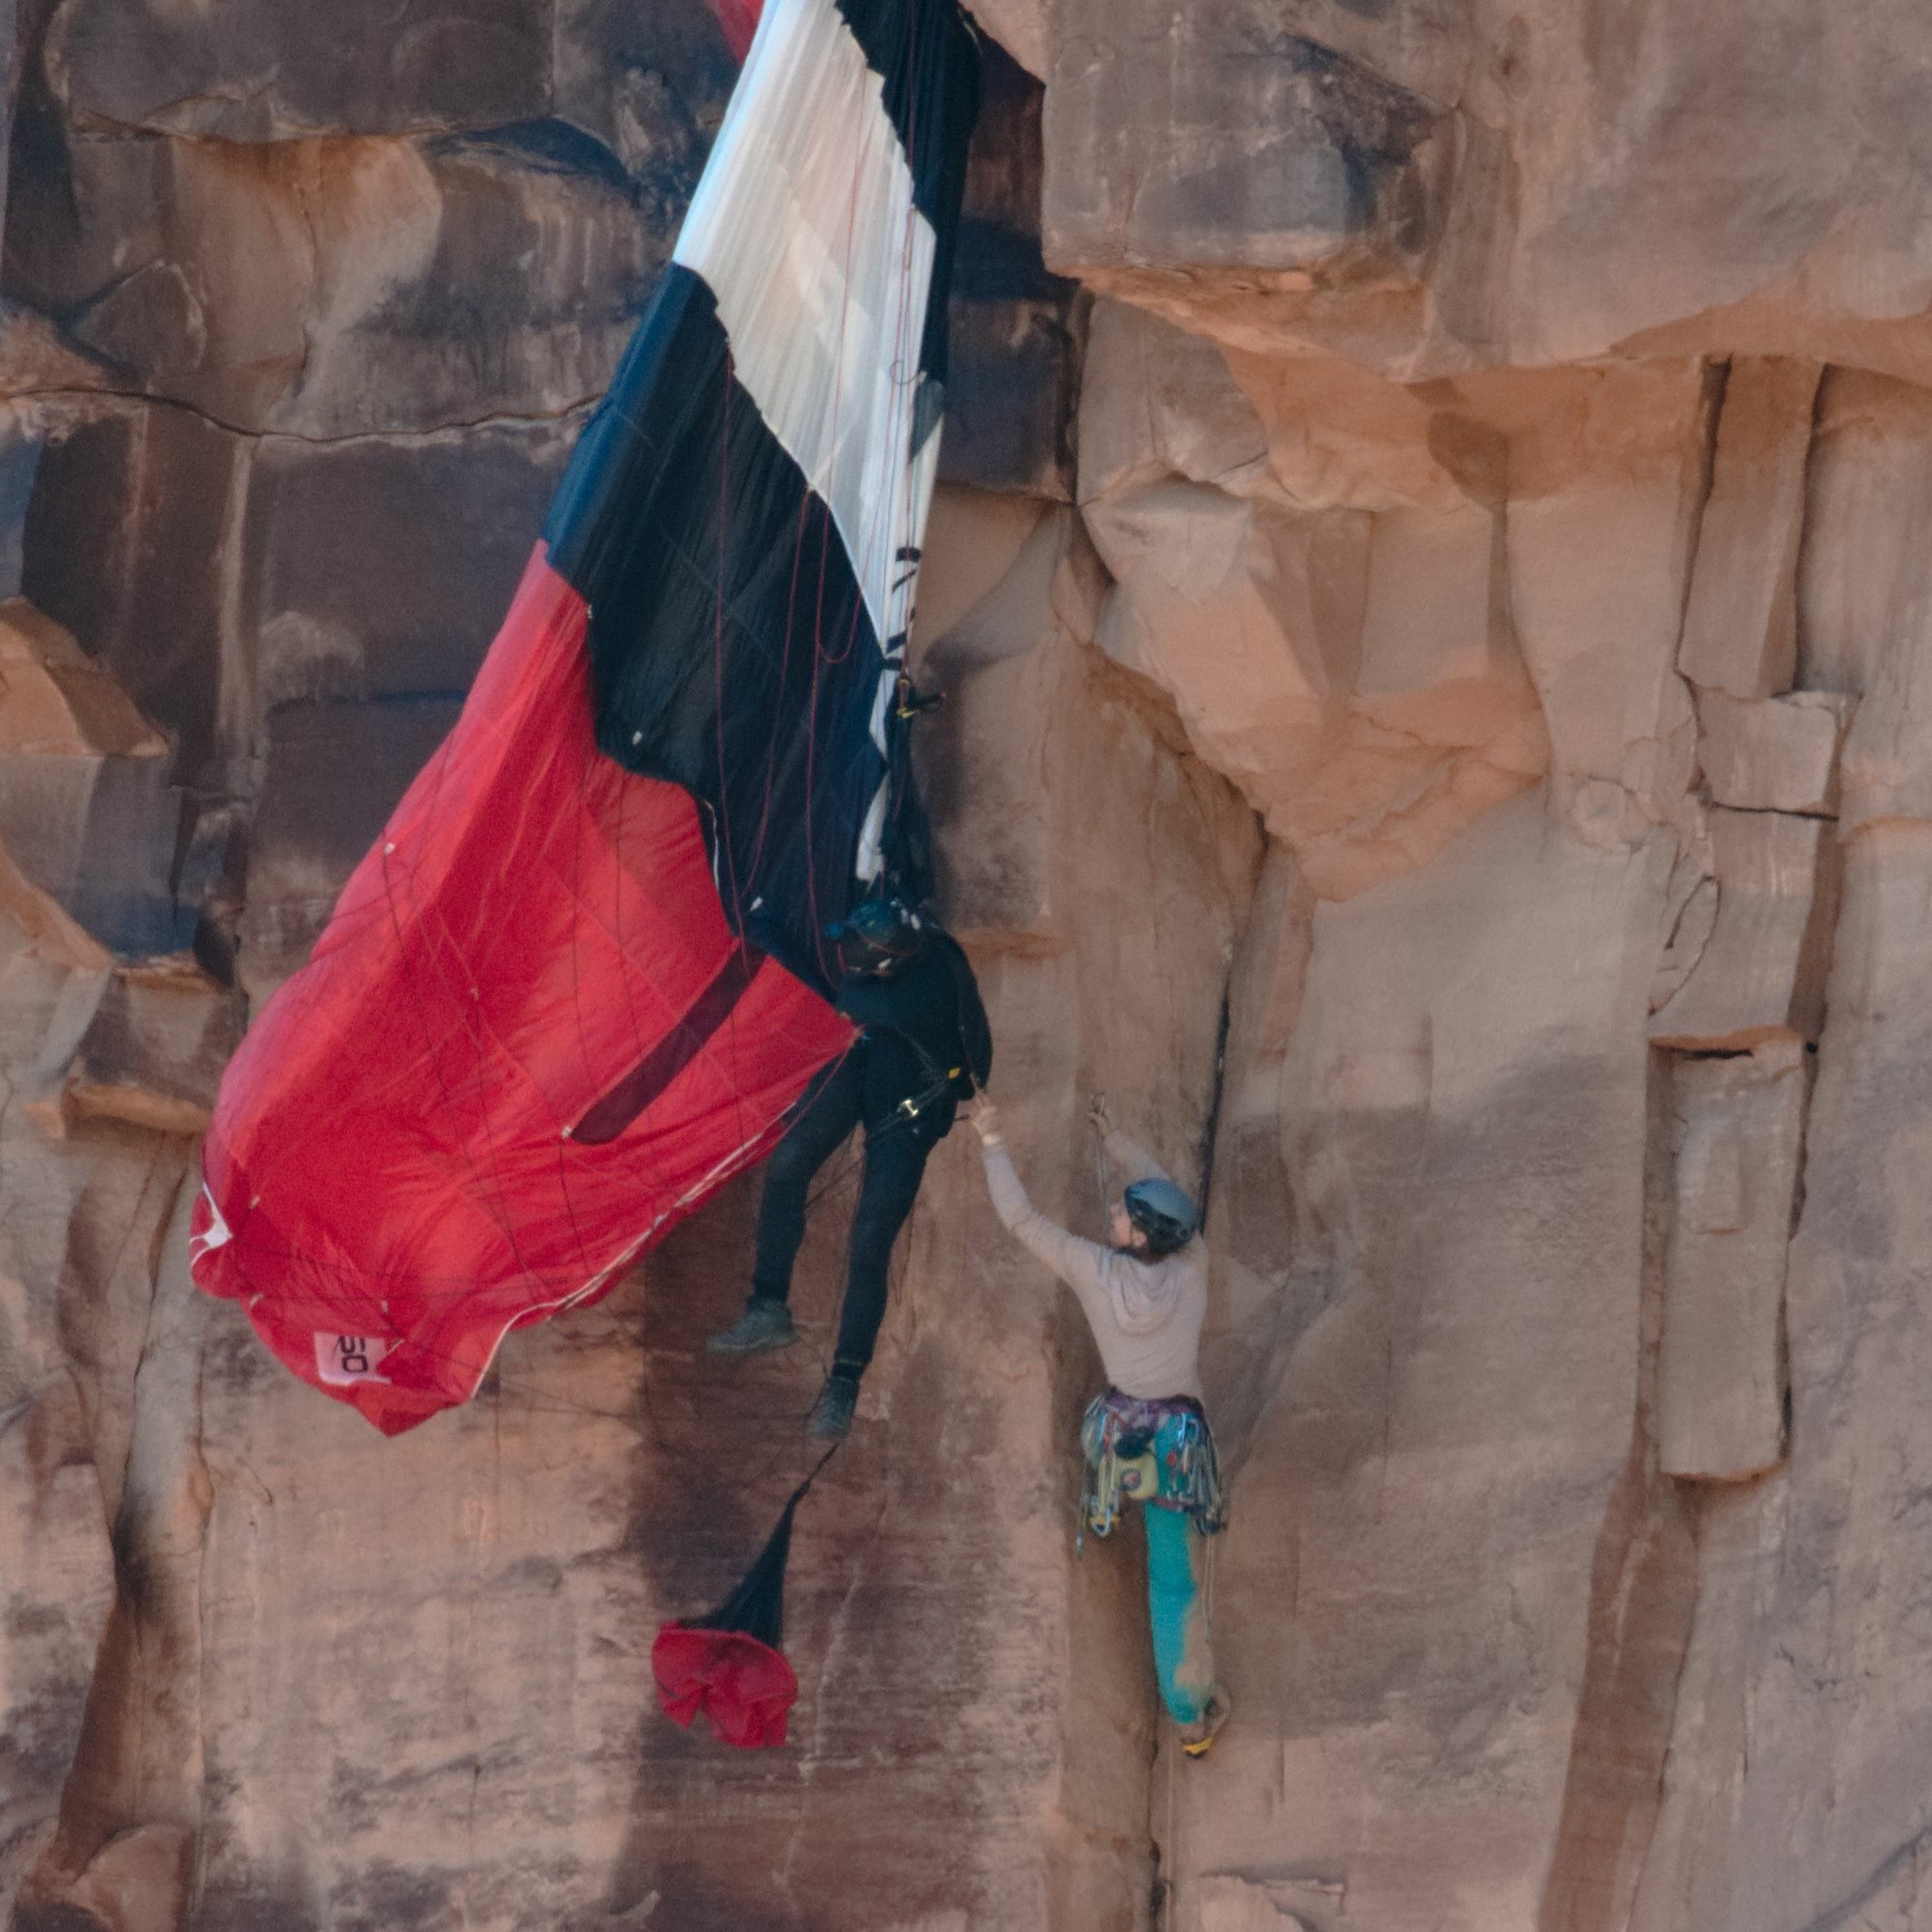 Ep 85 - Climber Rescues Base Jumper In Utah - River Barry